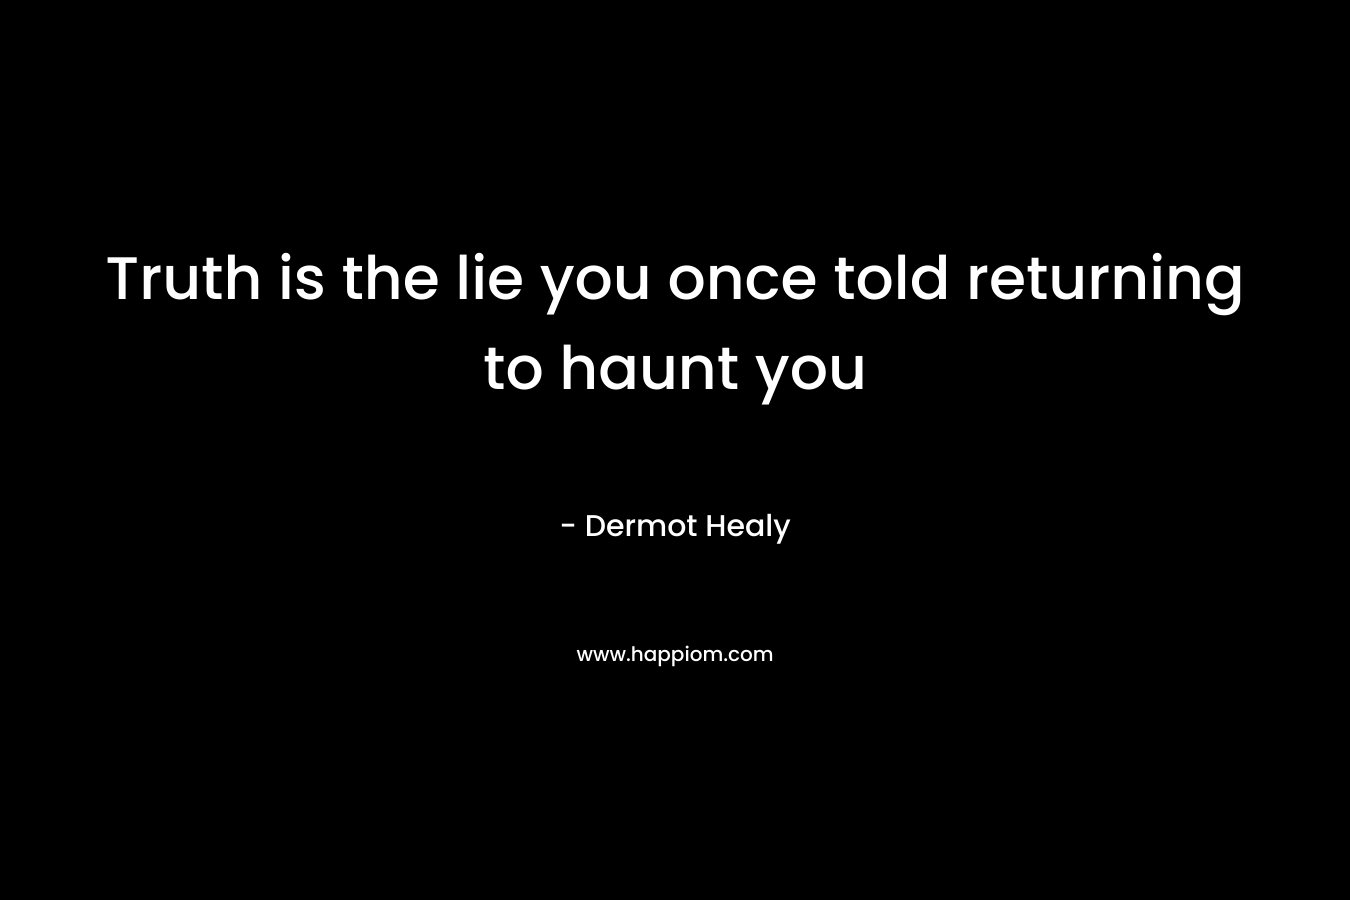 Truth is the lie you once told returning to haunt you